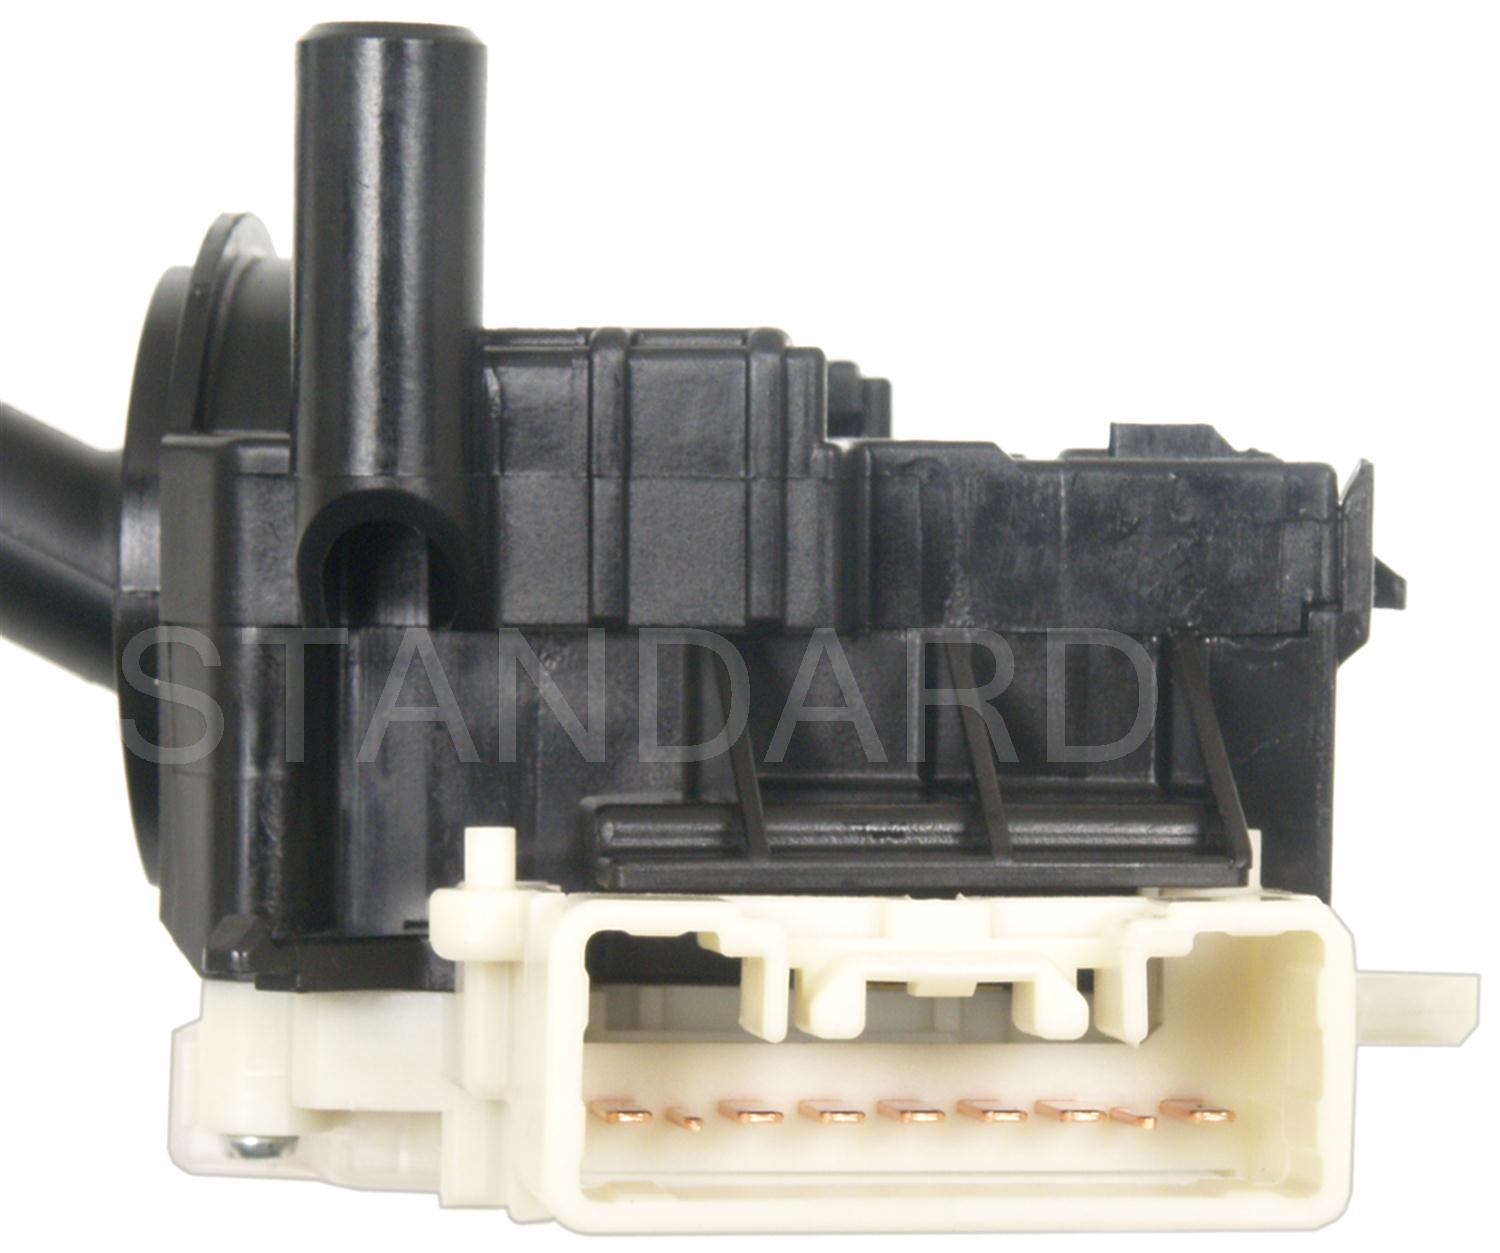 Picture of Standard Motor Products CBS1243 Standard Motor Products Cbs-1243 Combination Switch